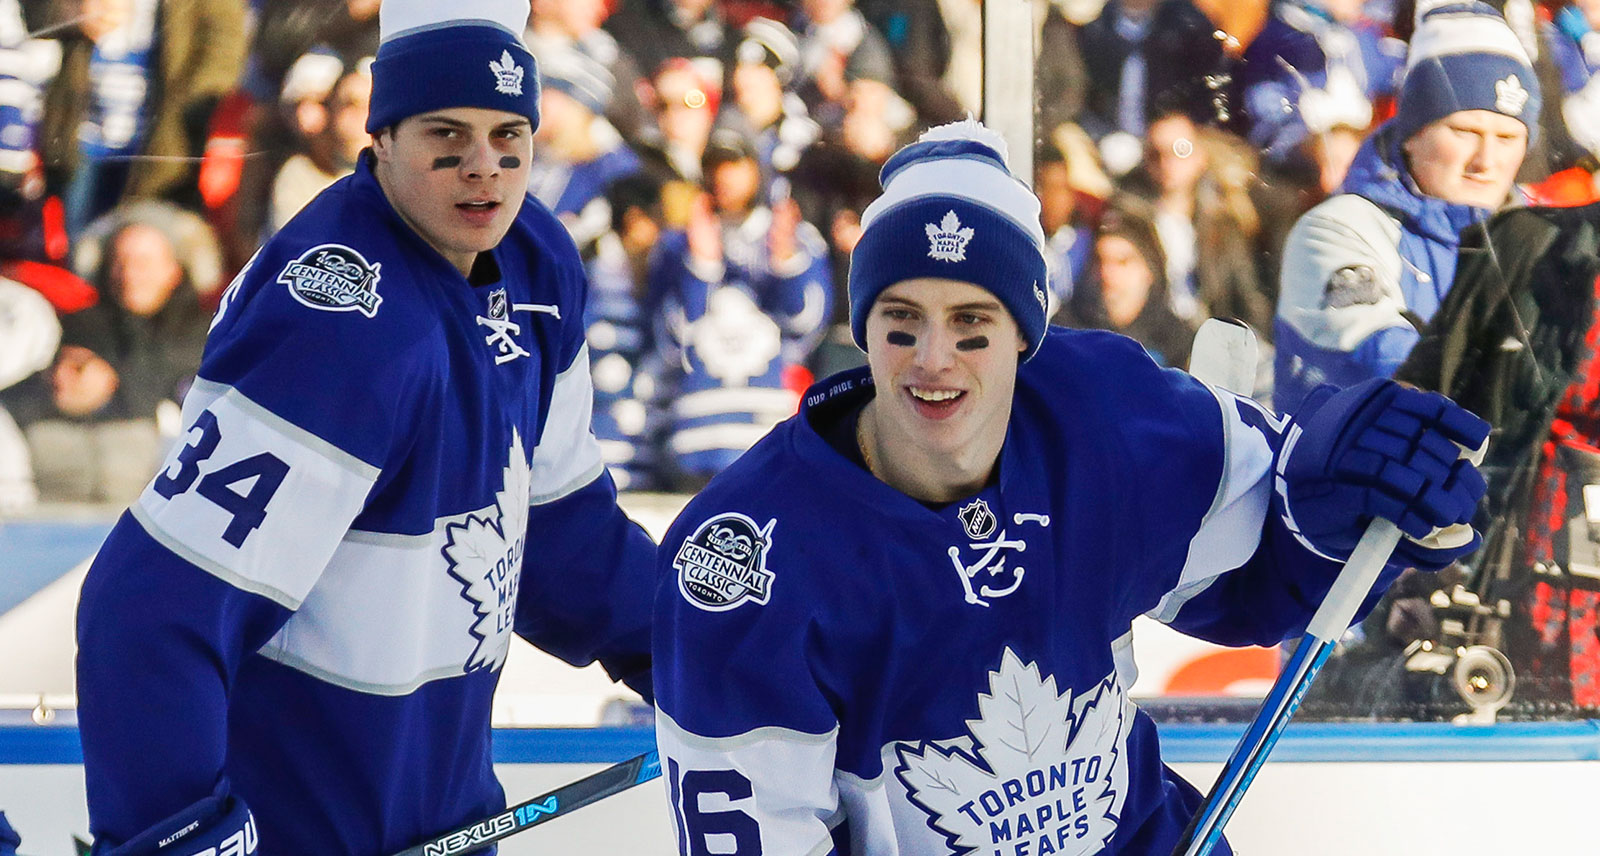 NHL - Look who joined Auston Matthews, Mitch Marner and